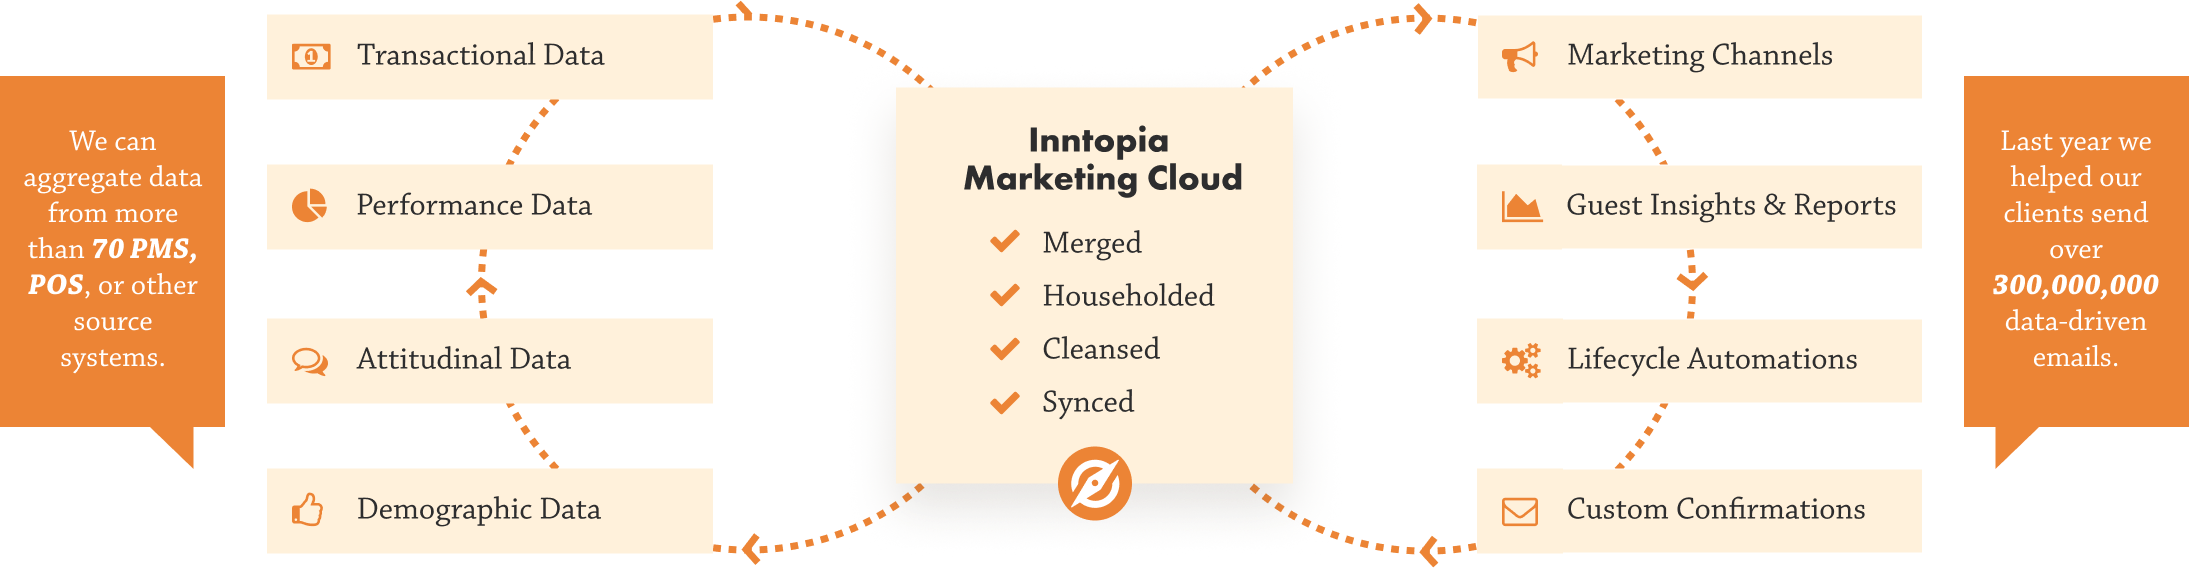 chart showing how data flows through inntopia marketing cloud CRM system